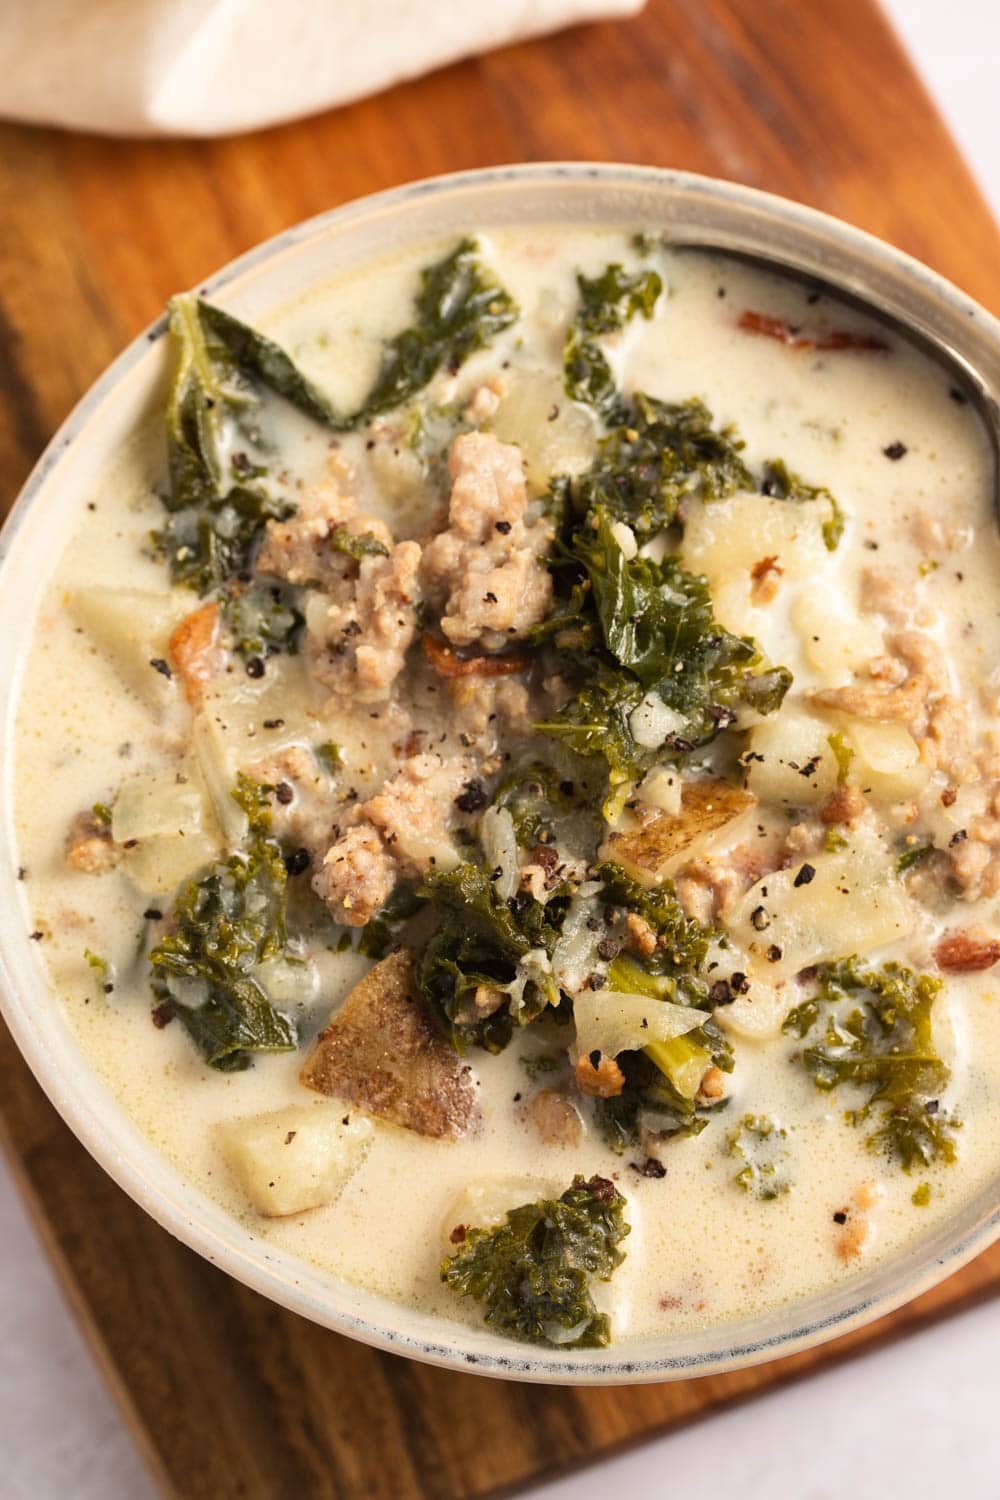 Bowl of Homemade Zuppa Toscana Soup with Kale, Sausage and Bacon